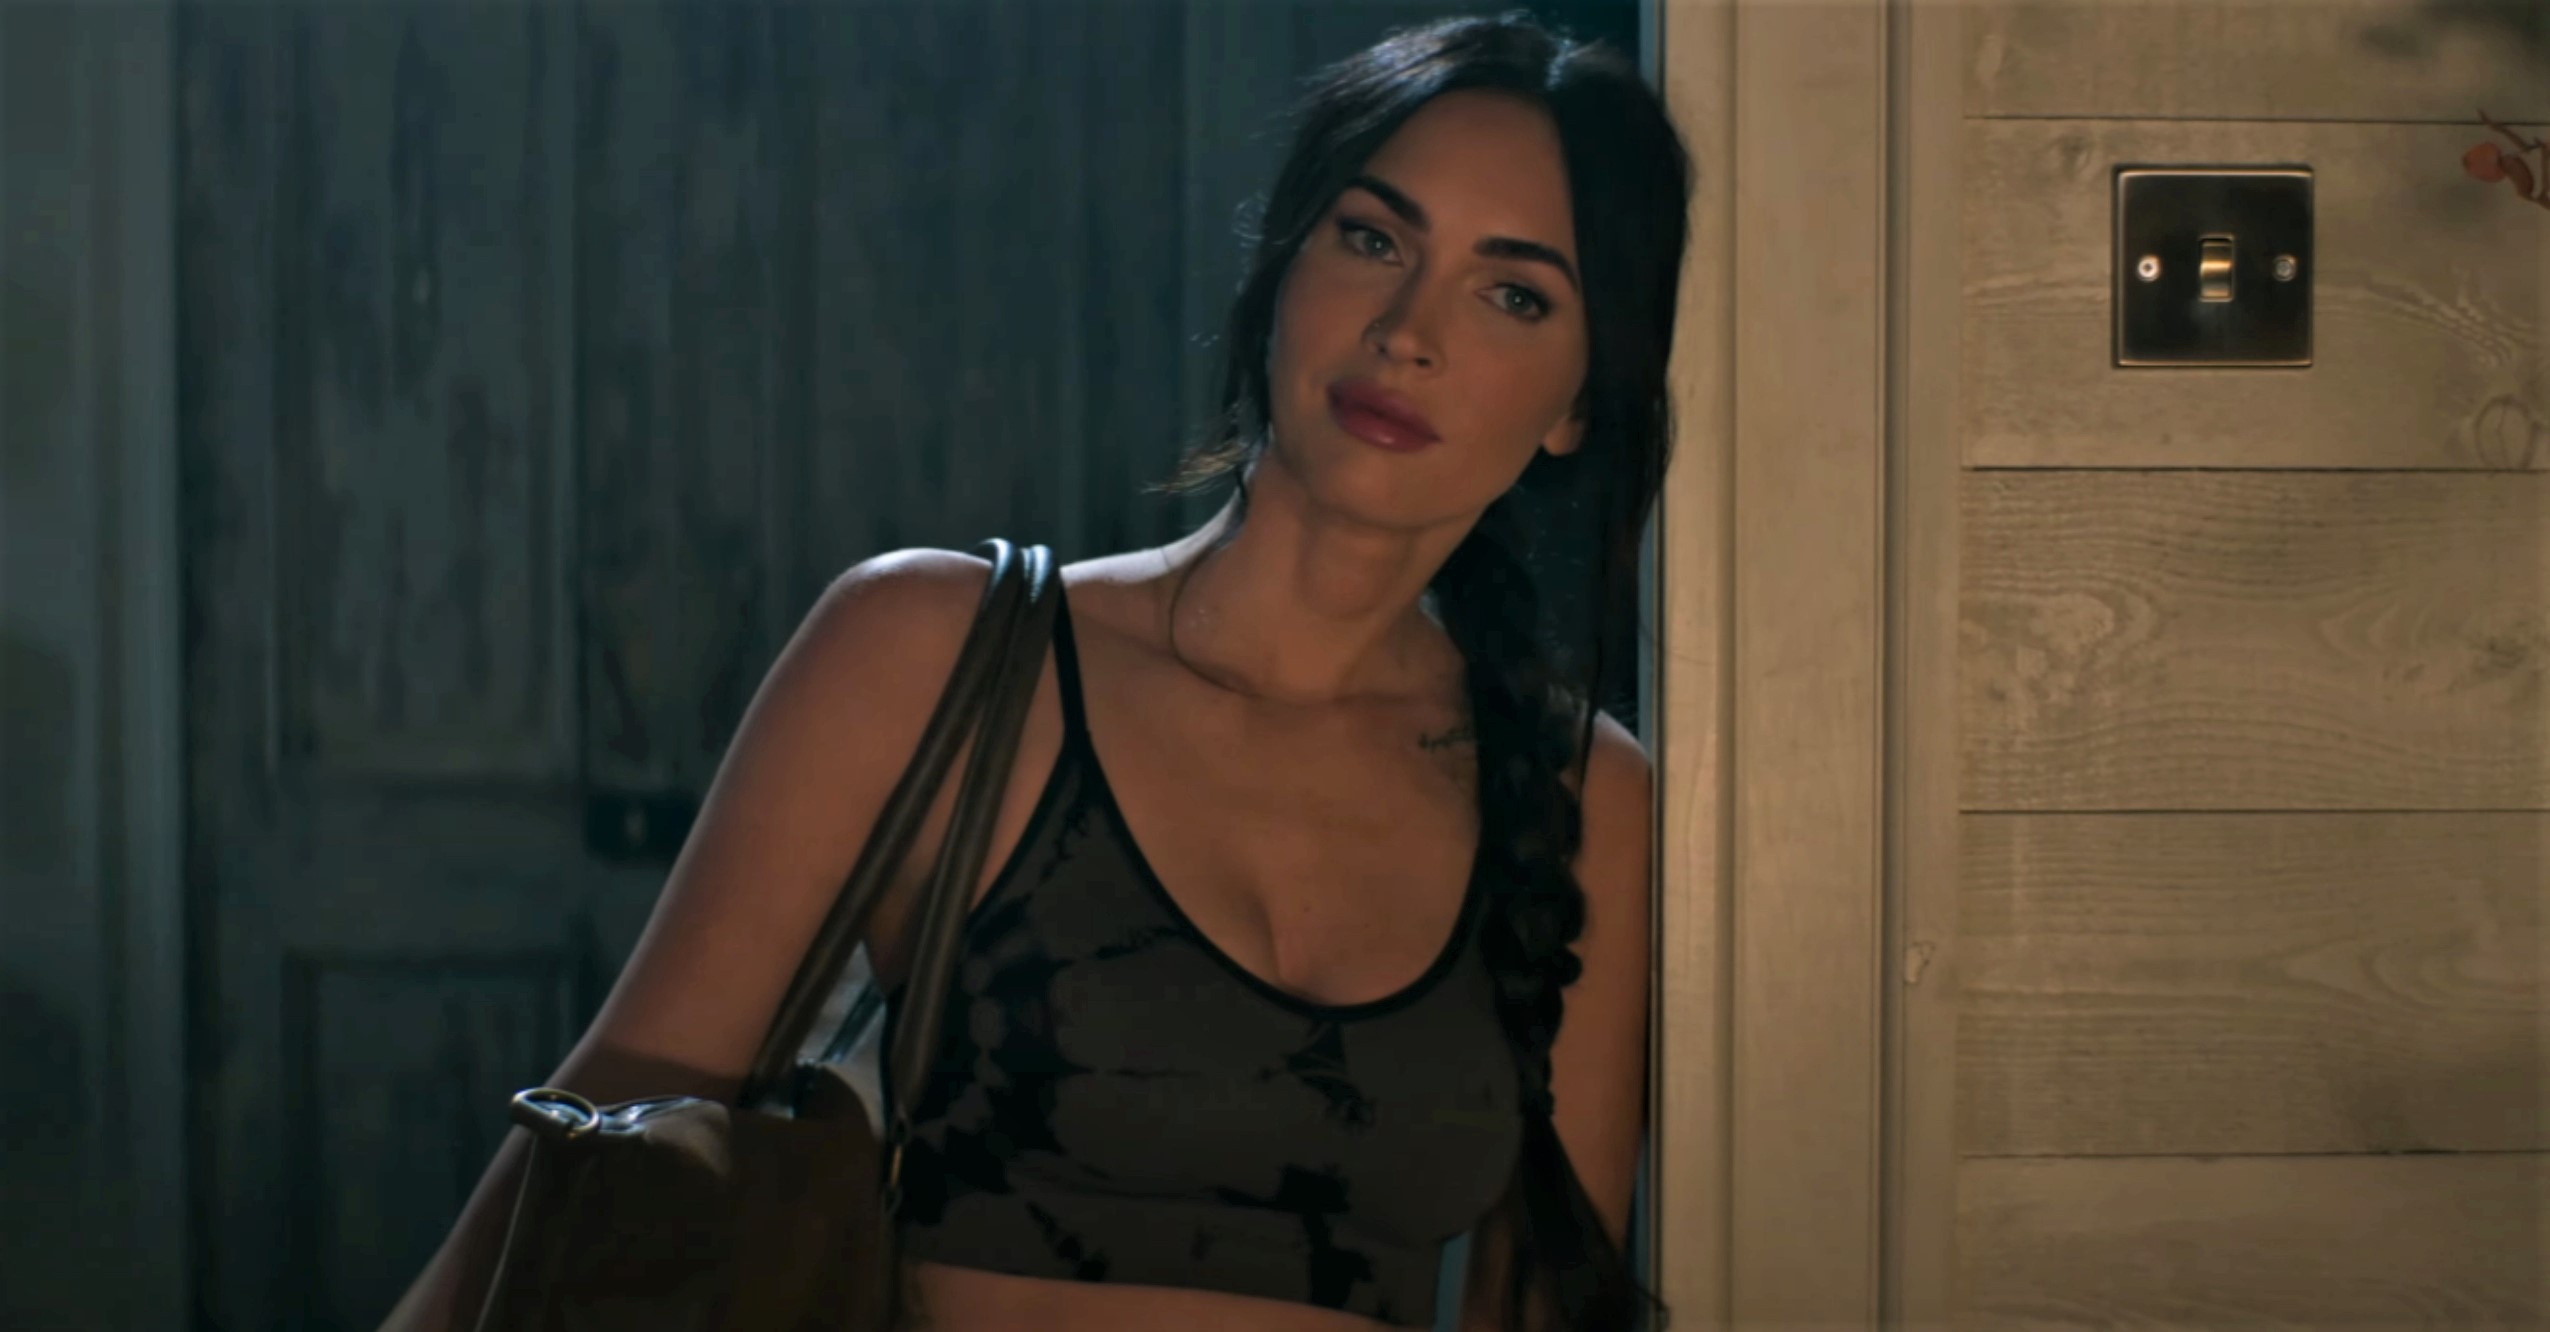 Watch Megan Fox Tussle With Jason Statham In 'Expendables 4' Trailer ...